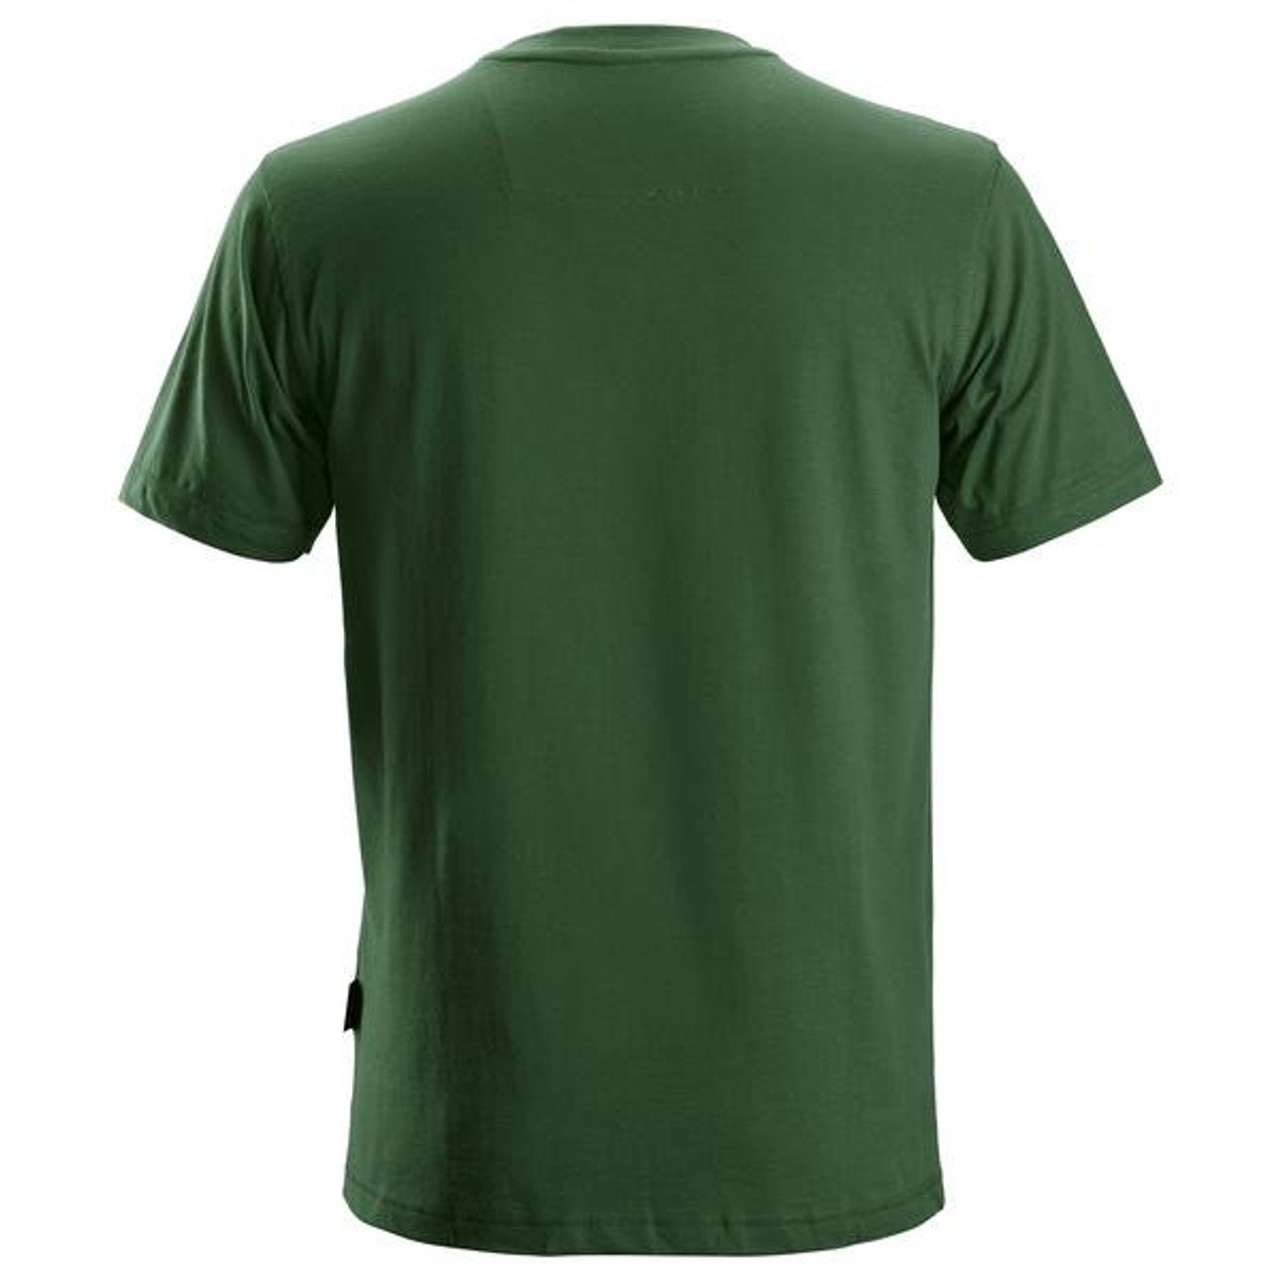 SNICKERS Shirt  2502 with  for SNICKERS Shirt  | 2502 Green Short Sleeve Allround Work Shirt with  Cotton with Stretch that have Short Sleeve  available in Australia and New Zealand